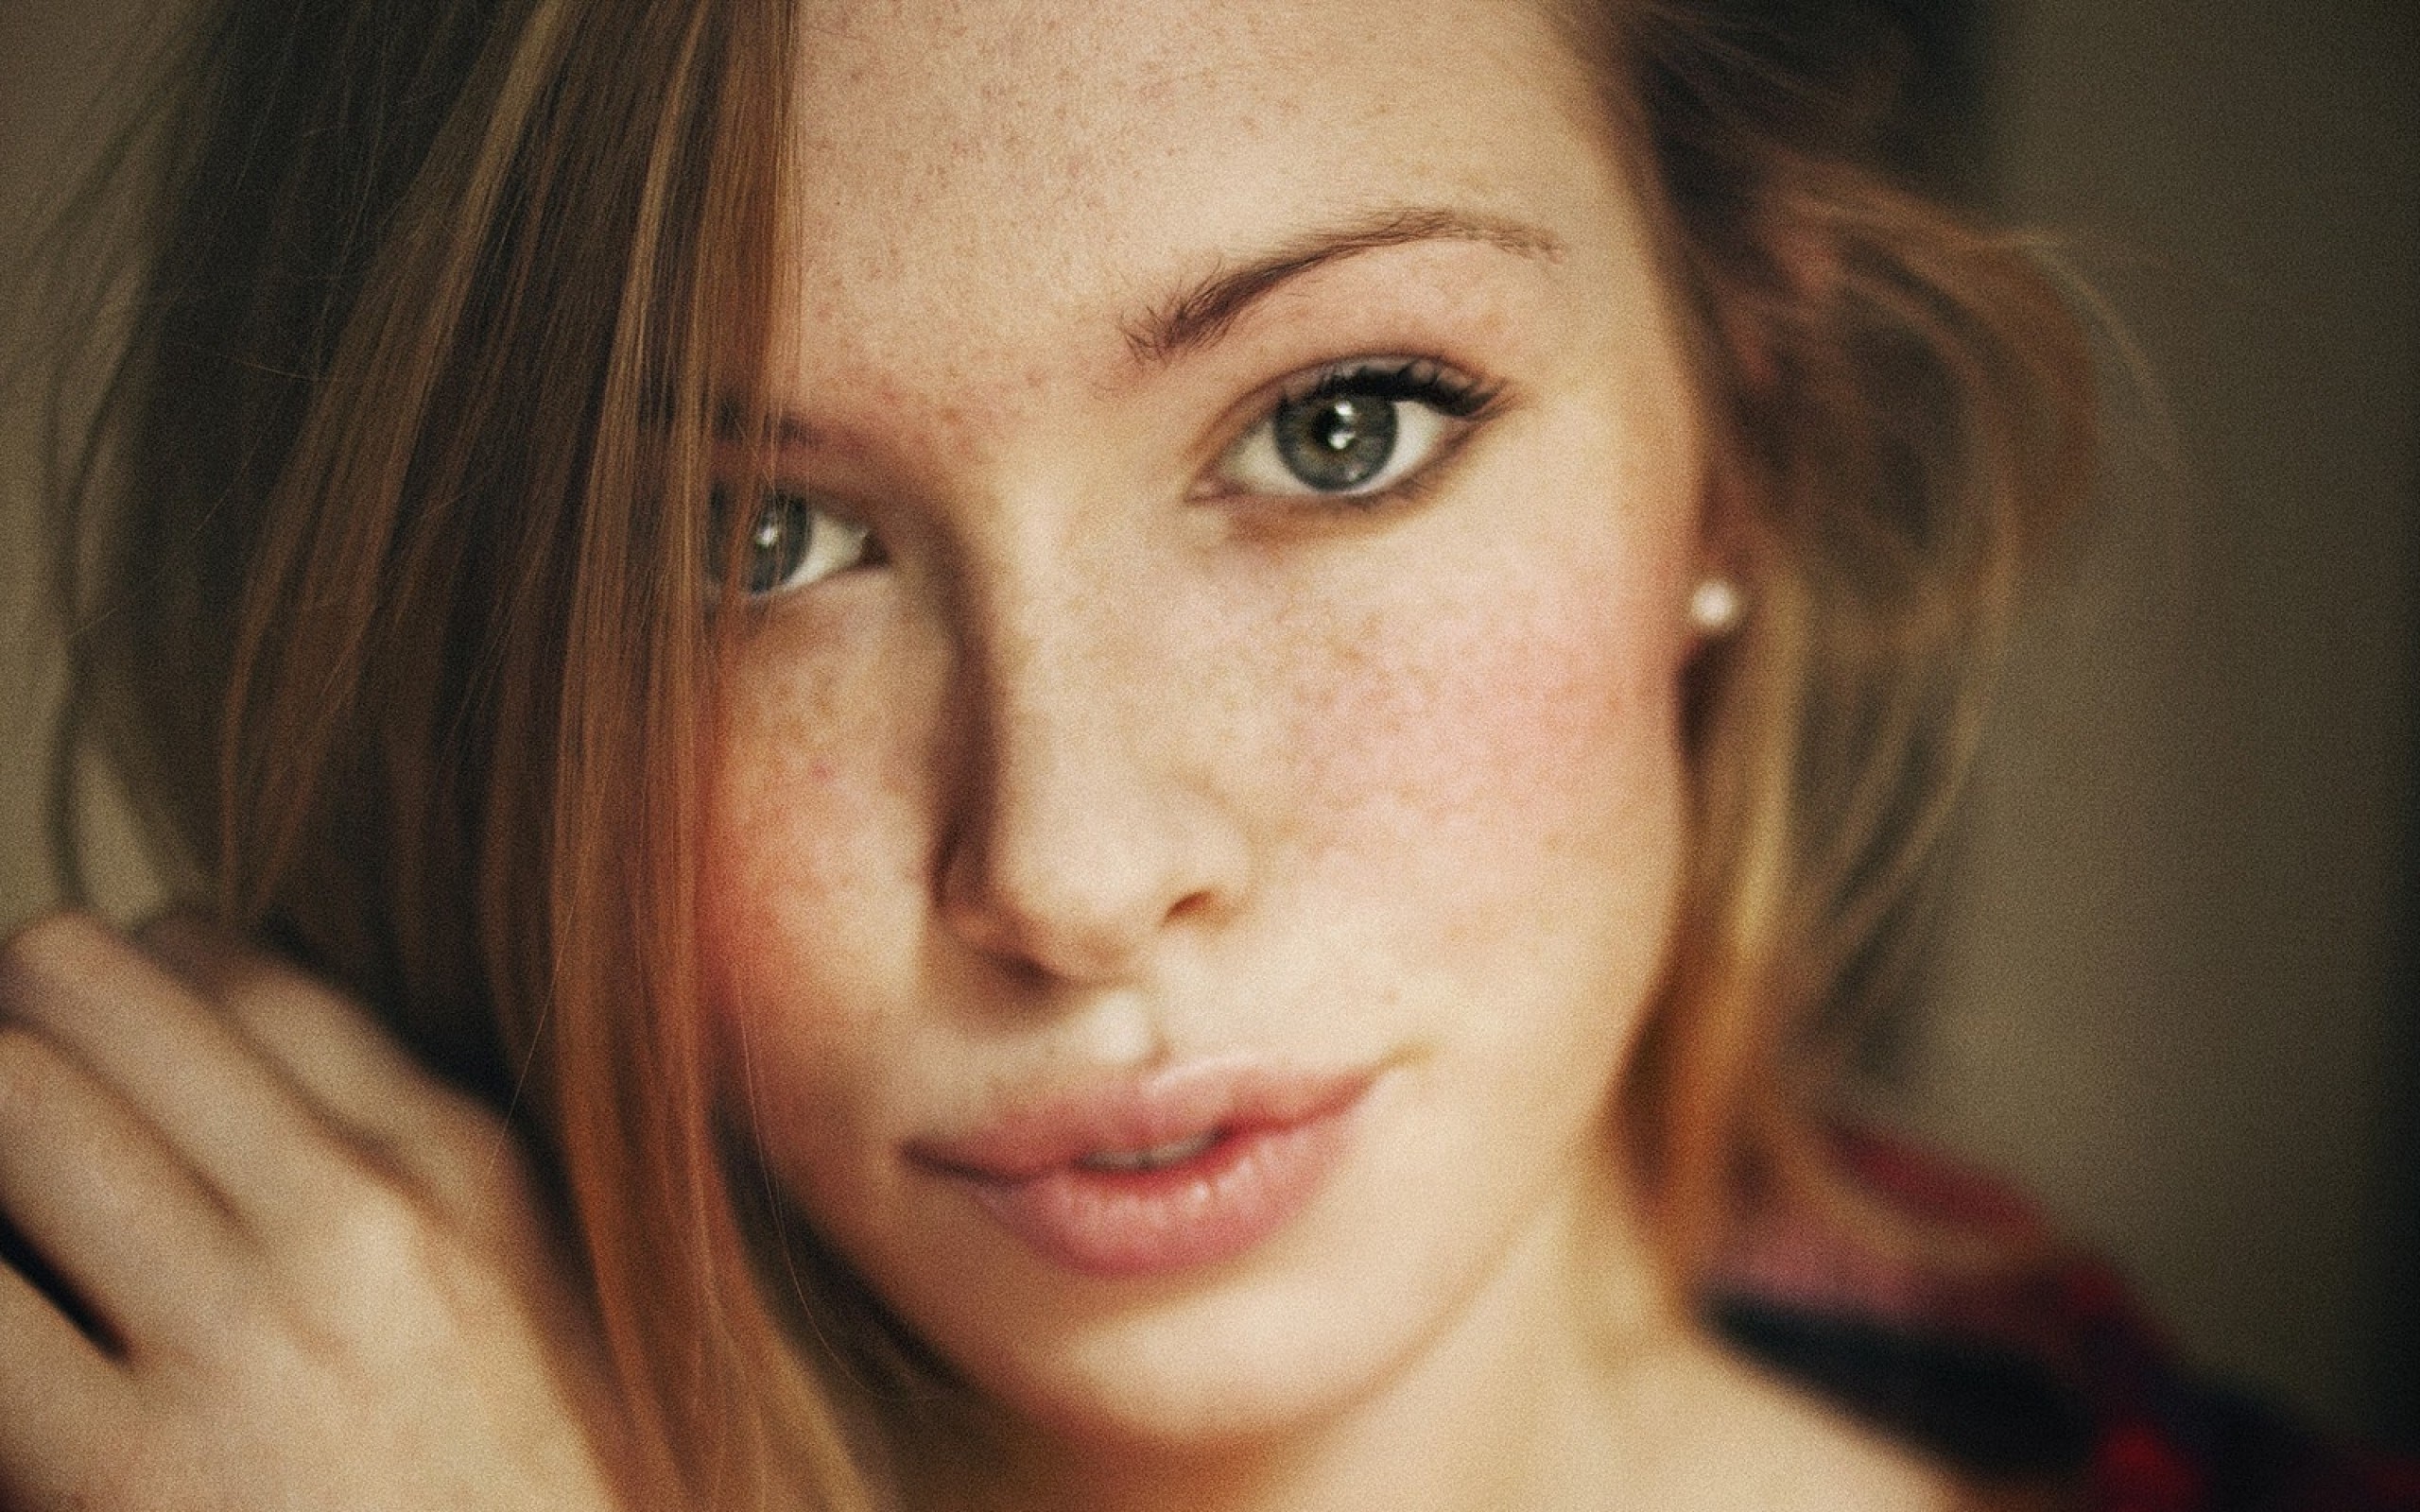 2560x1600 Portrait of a Pretty Face wallpapers and stock photos